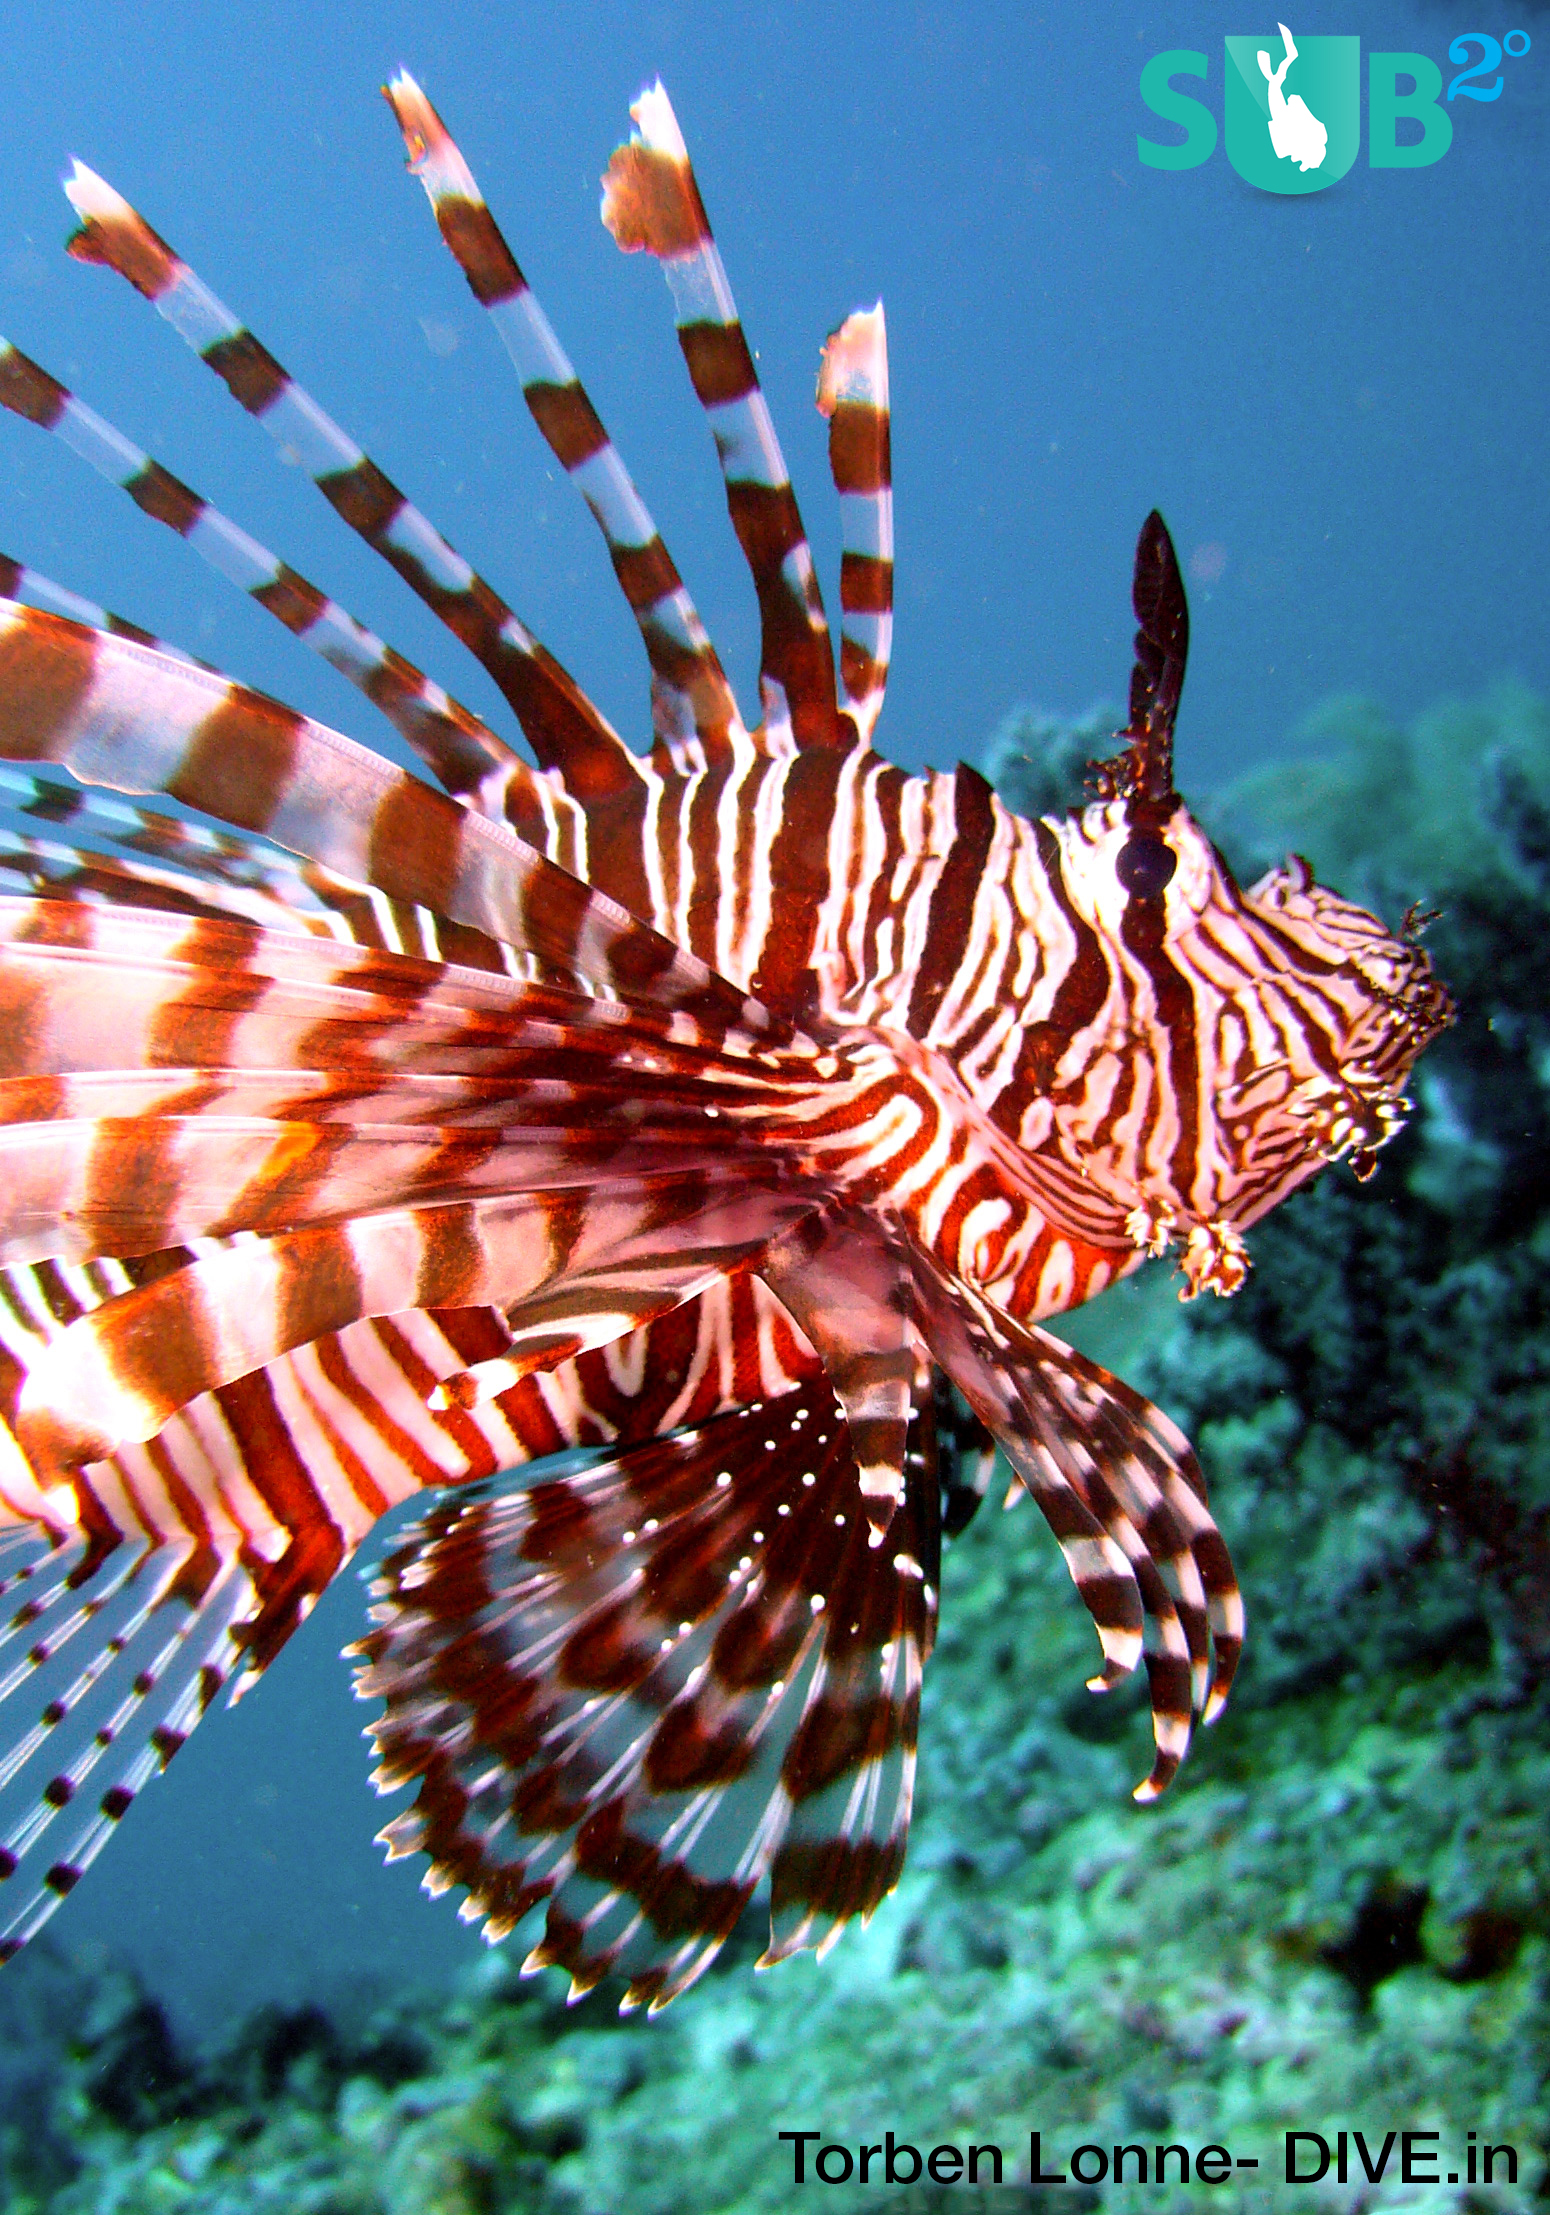 The red lionfish (Pterois volitans), one of the several species of lionfish, is considered to be the most common and the most famous representative of lionfish.